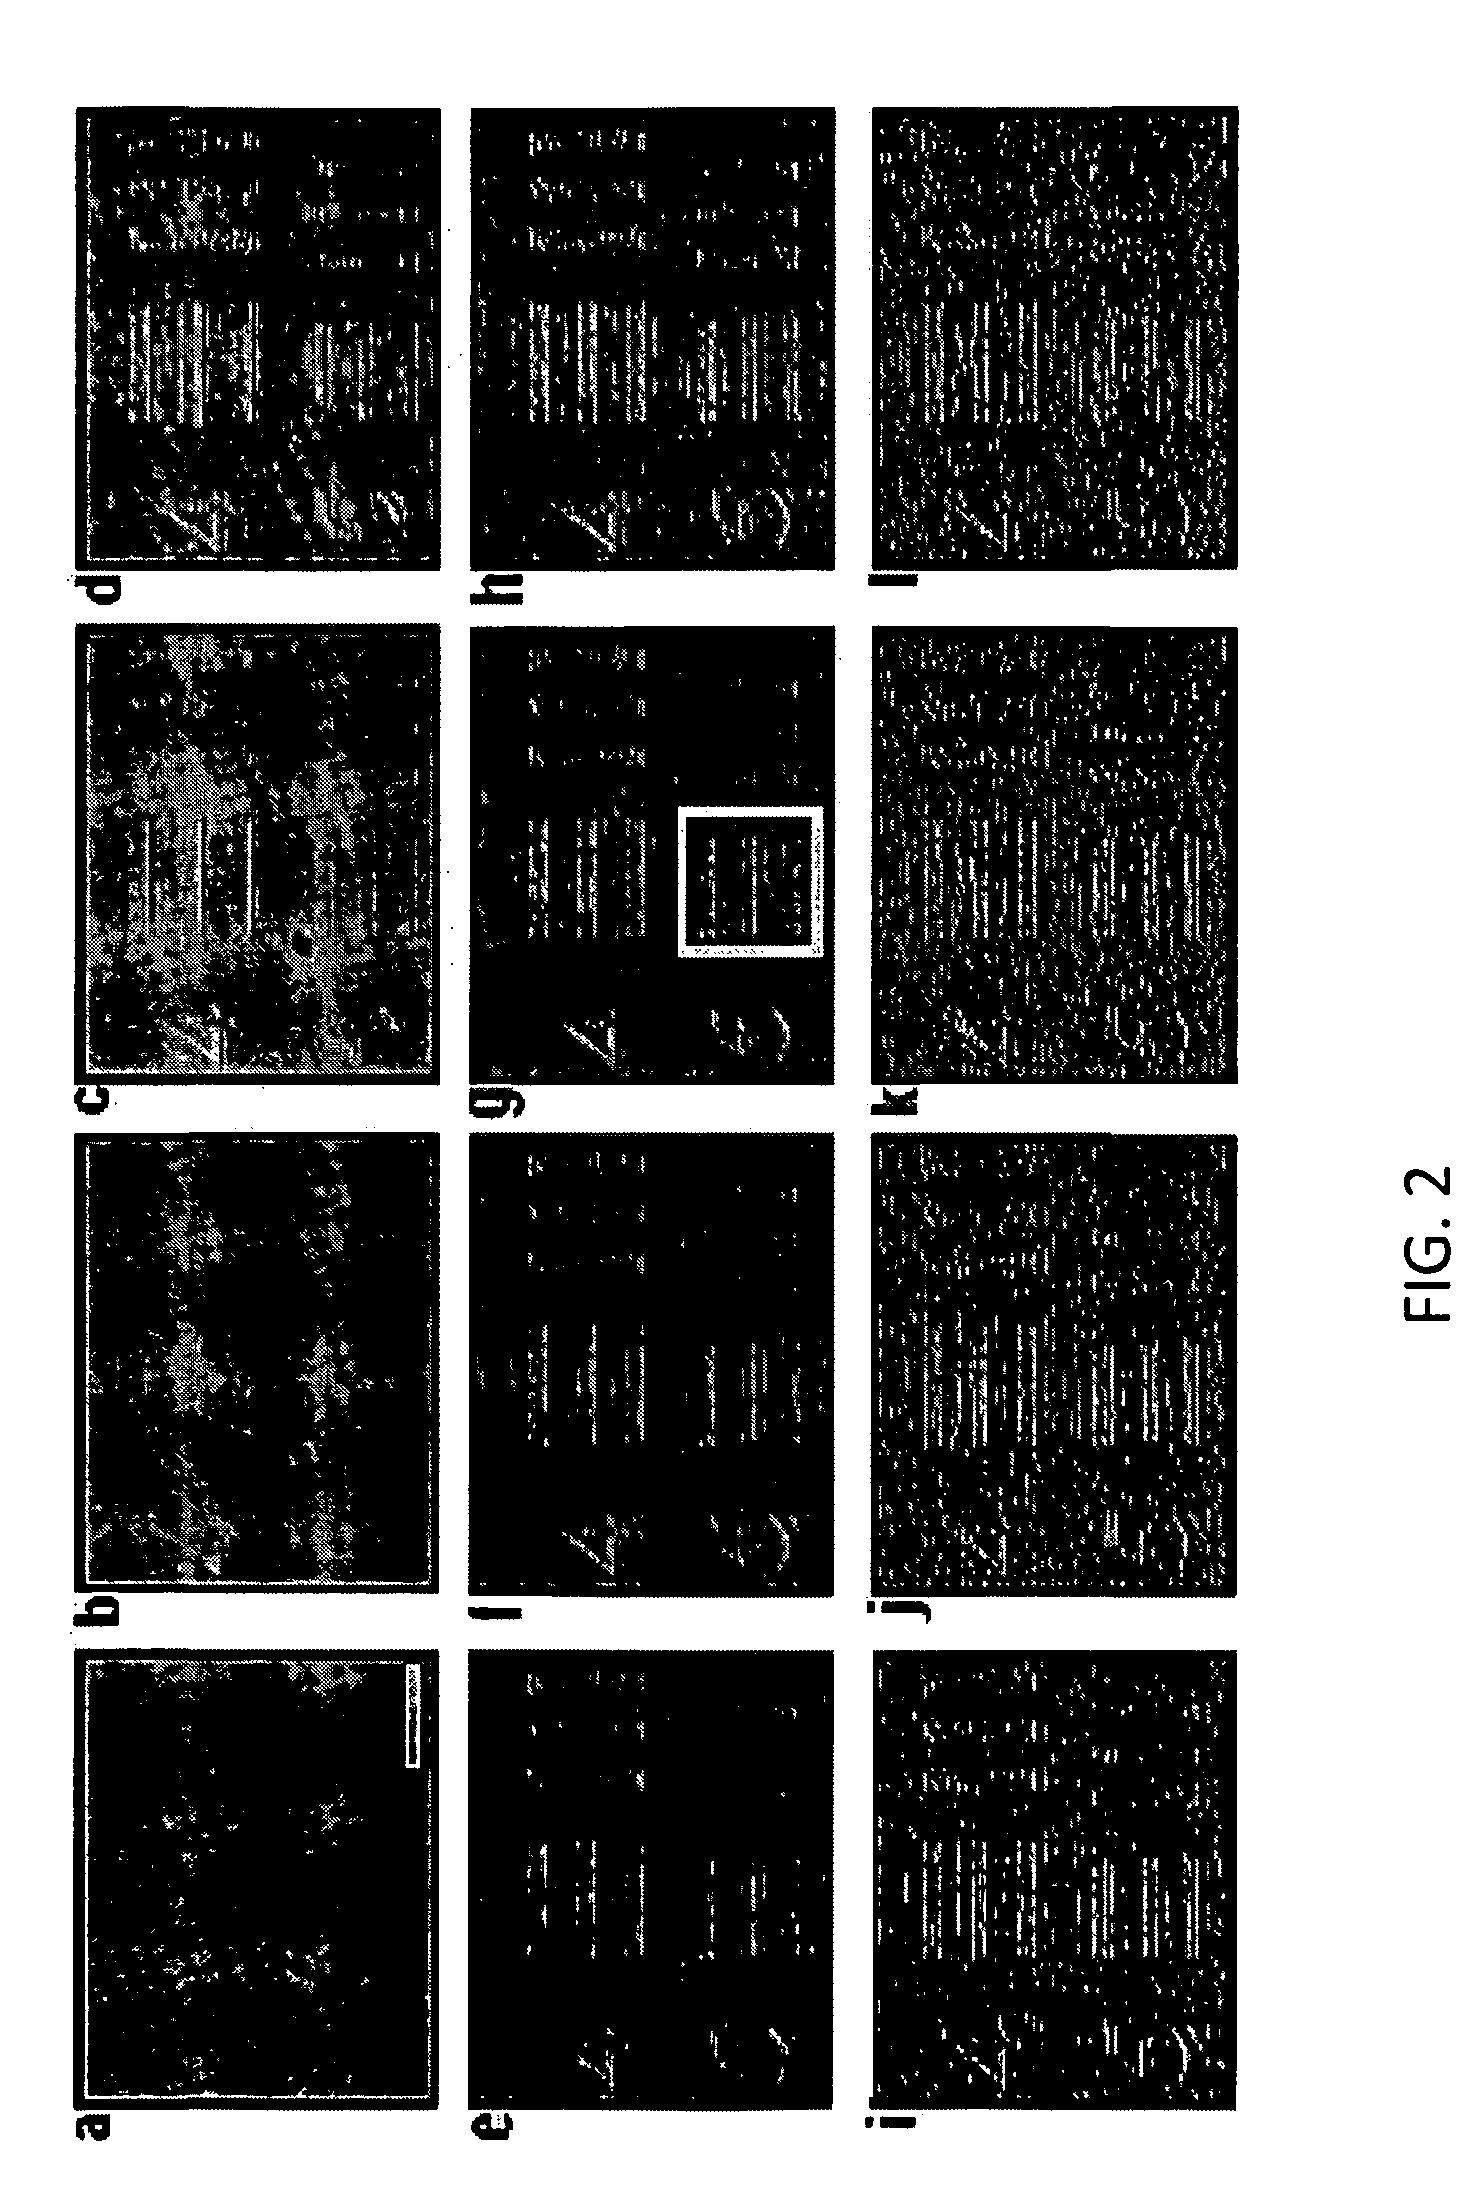 System and method for nonlinear self-filtering via dynamical stochastic resonance